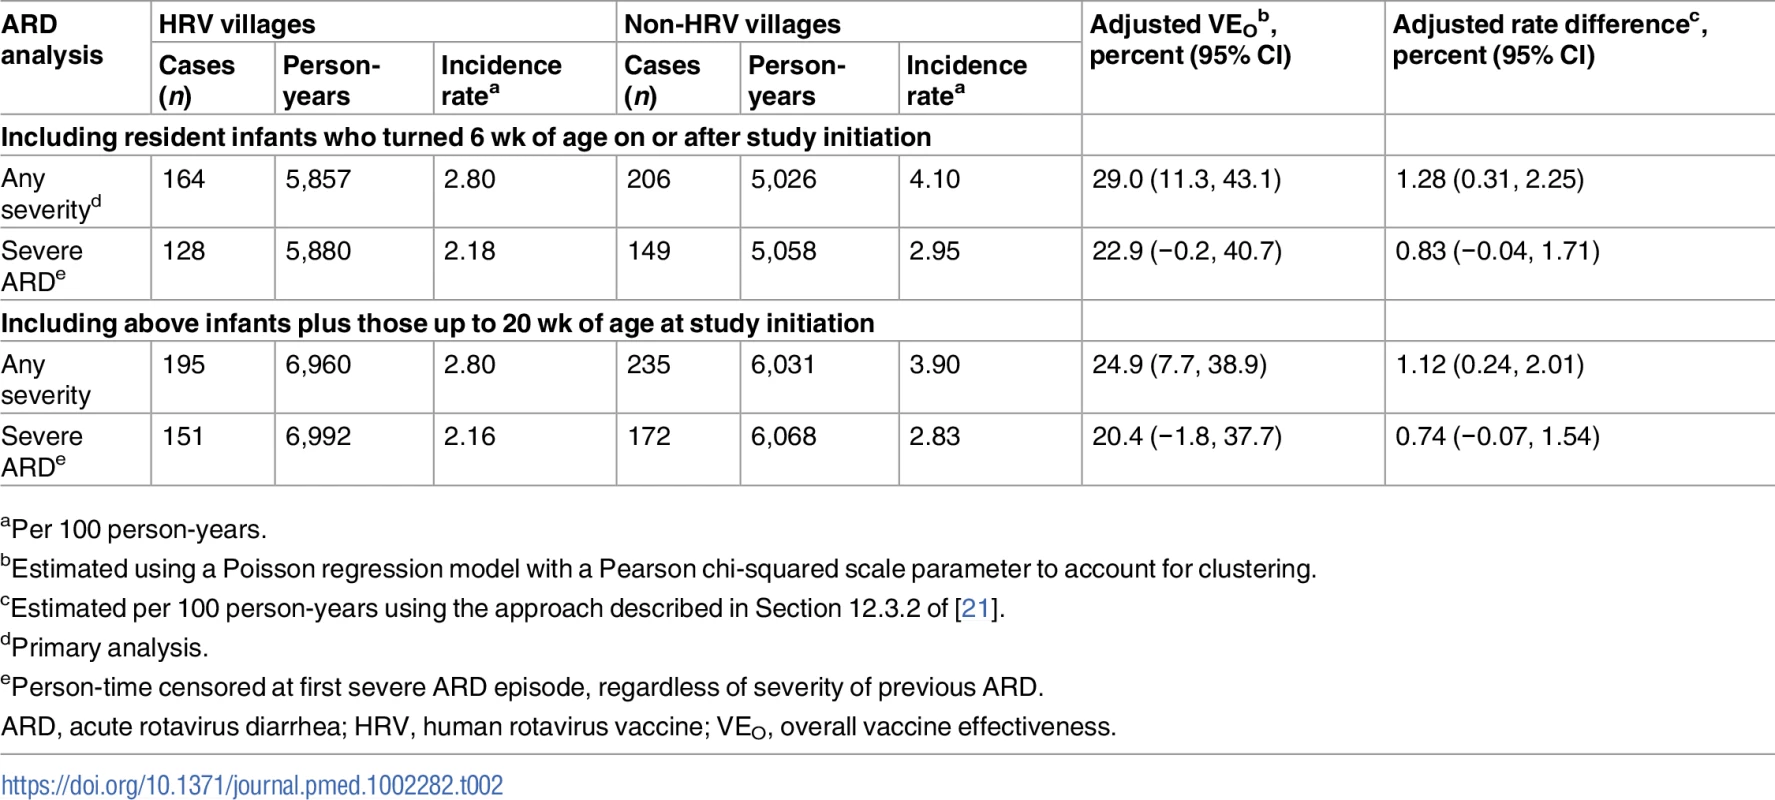 Overall effectiveness of the human rotavirus vaccination program in preventing presentations of acute rotavirus diarrhea of any severity and severe acute rotavirus diarrhea among age-eligible children less than 2 y of age, regardless of actual receipt of human rotavirus vaccine.